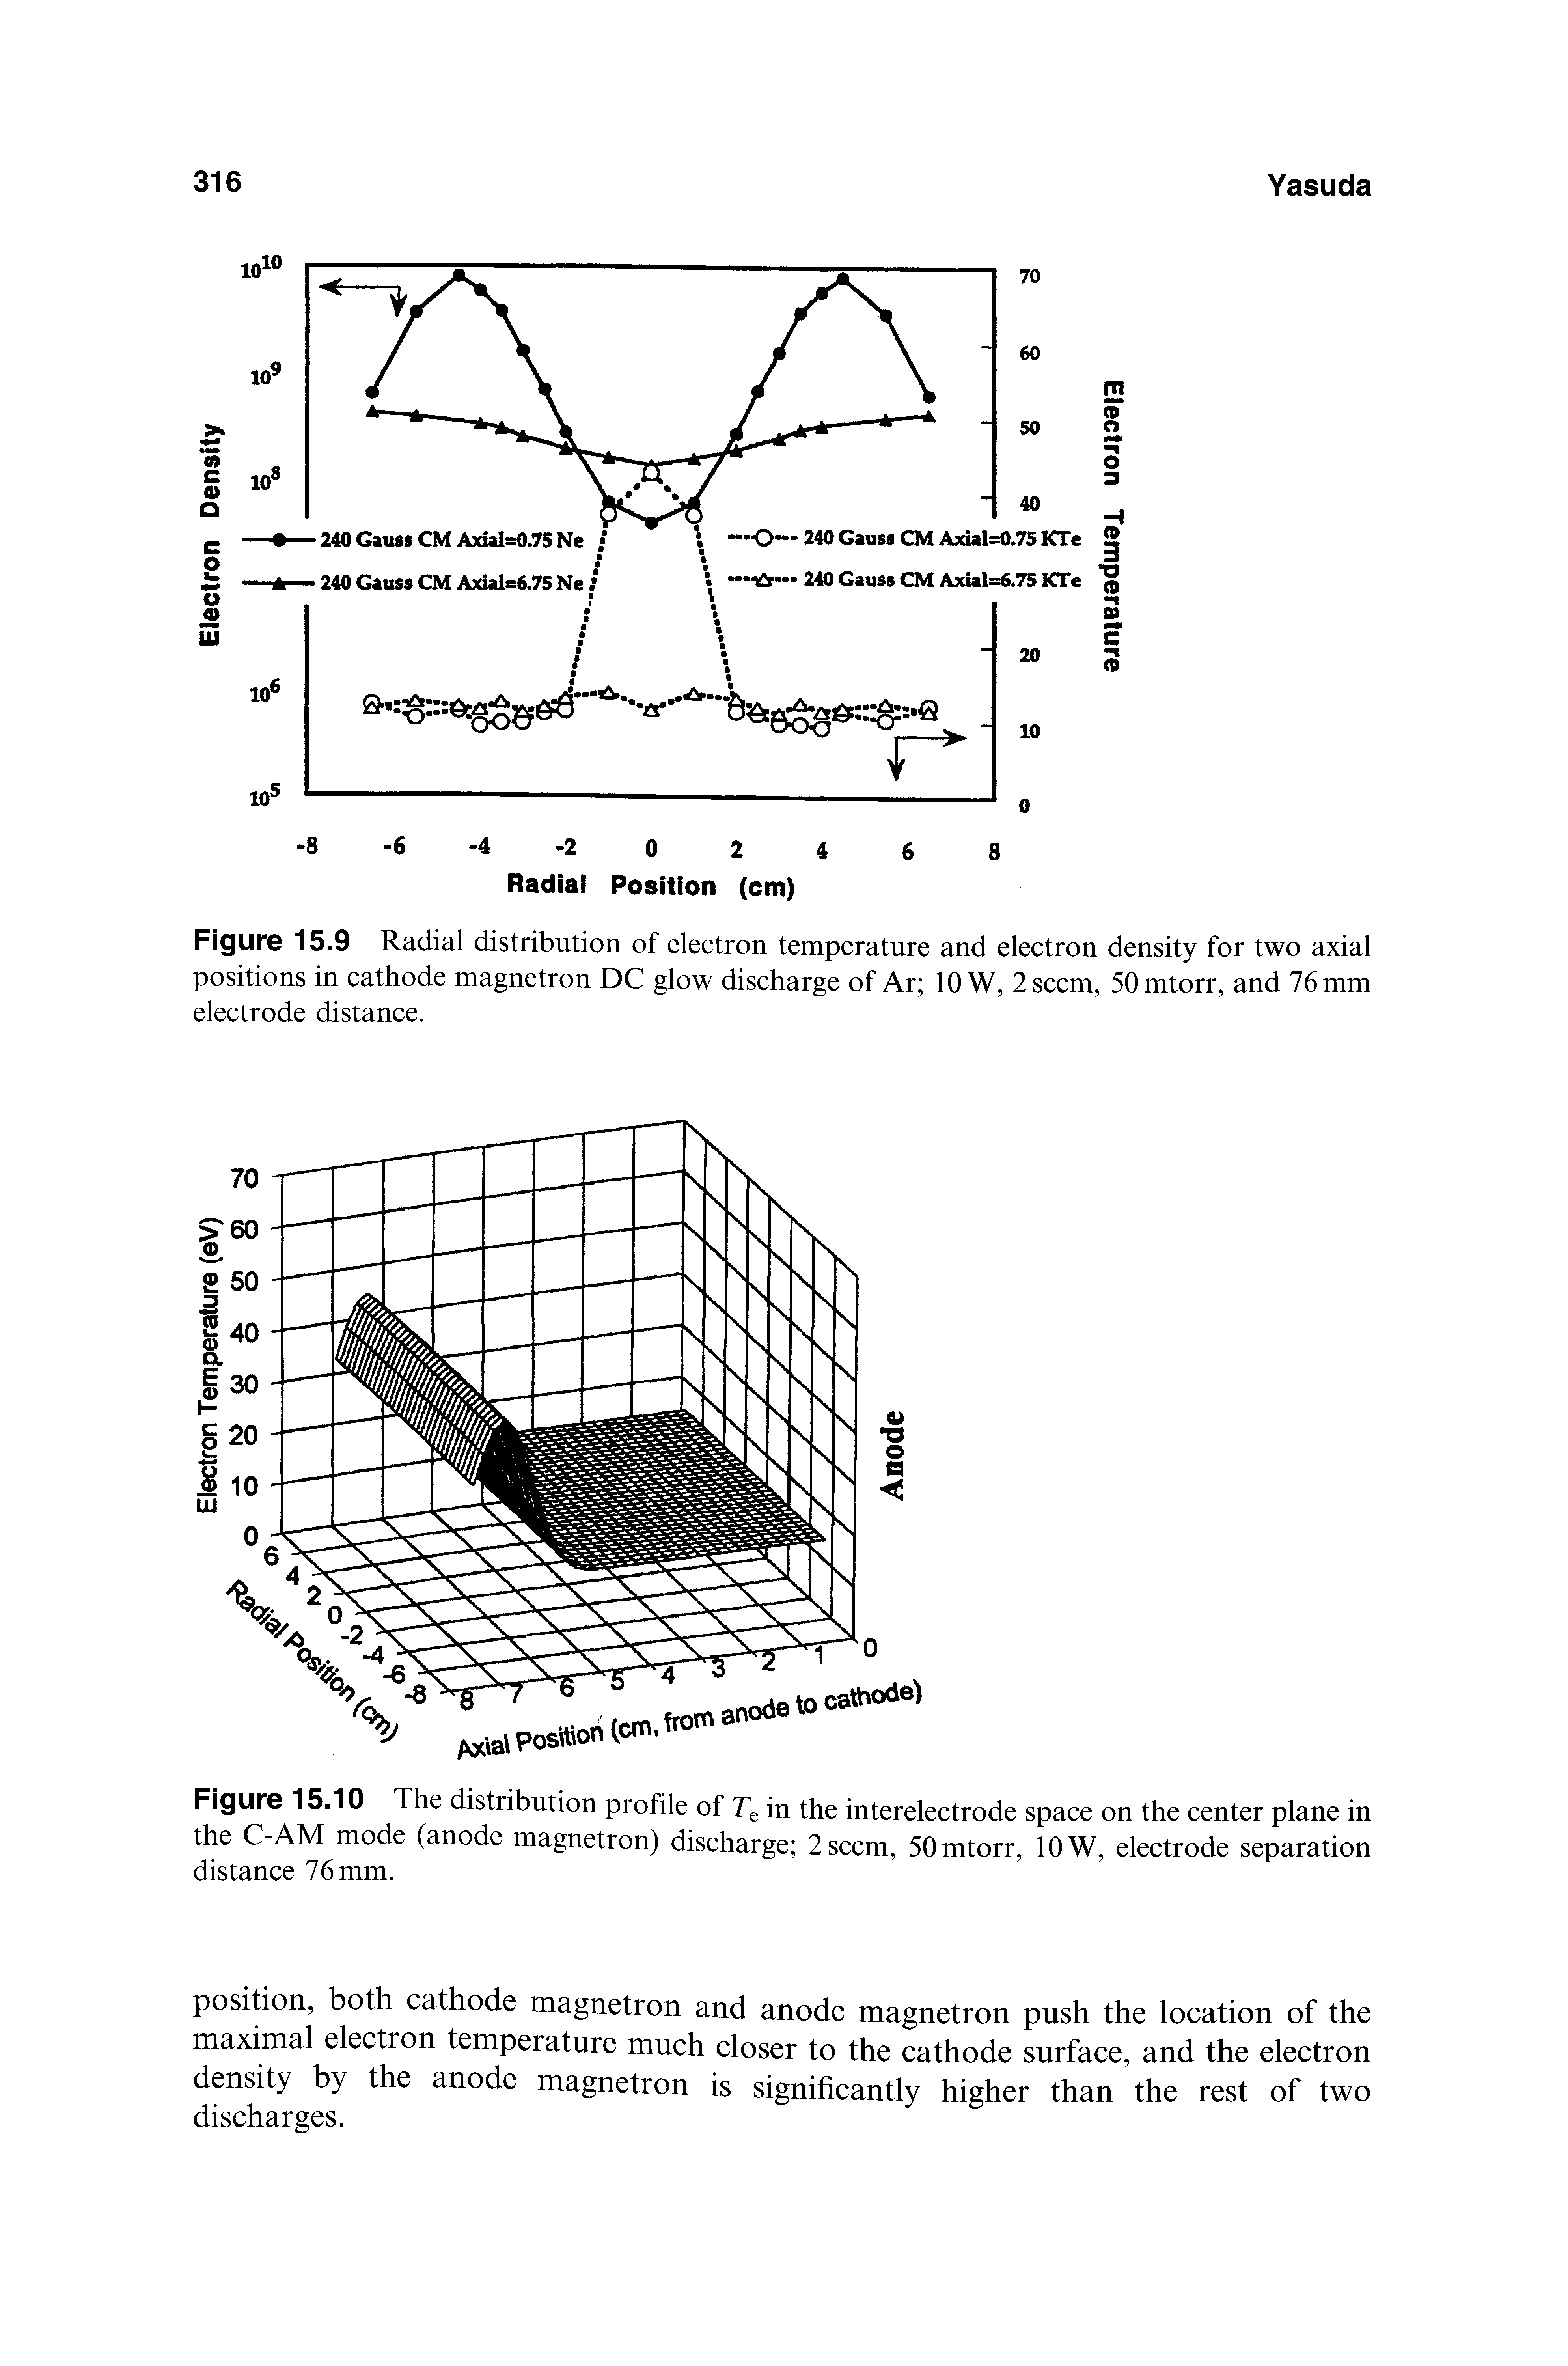 Figure 15.10 The distribution profile of in the interelectrode space on the center plane in the C-AM mode (anode magnetron) discharge 2 seem, SOmtorr, 10 W, electrode separation distance 76 mm.